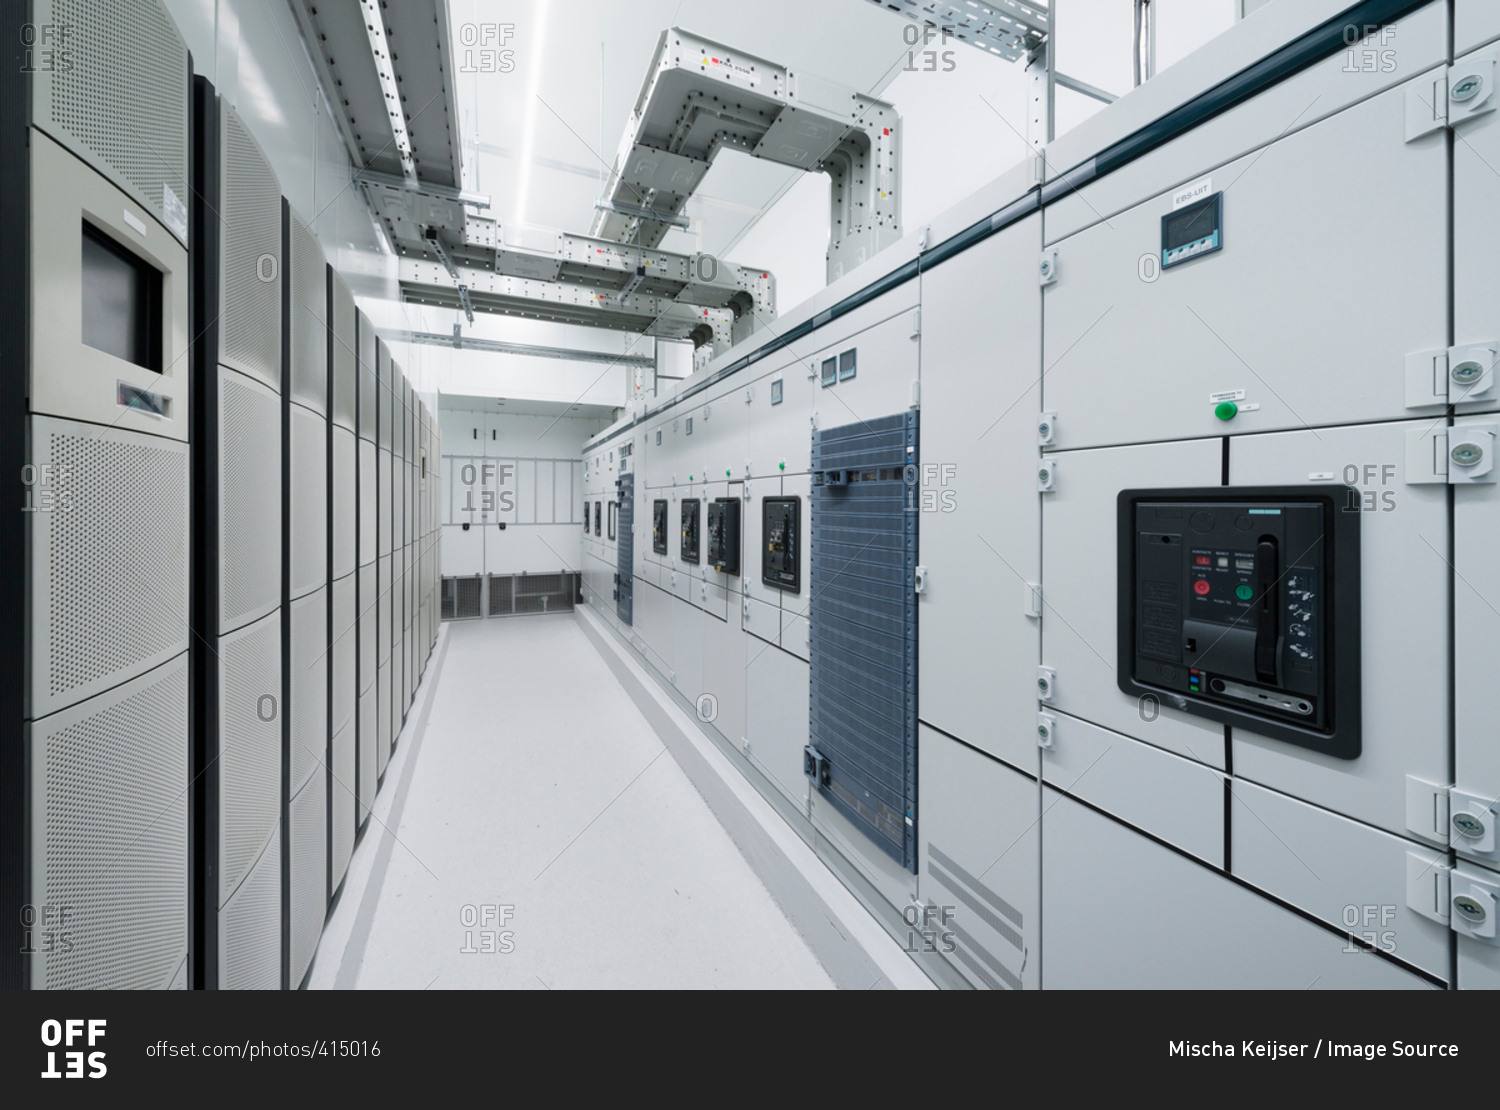 Datacenter for storing large amounts of data, and is an important hub for the internet. APU installation, emergency power unit